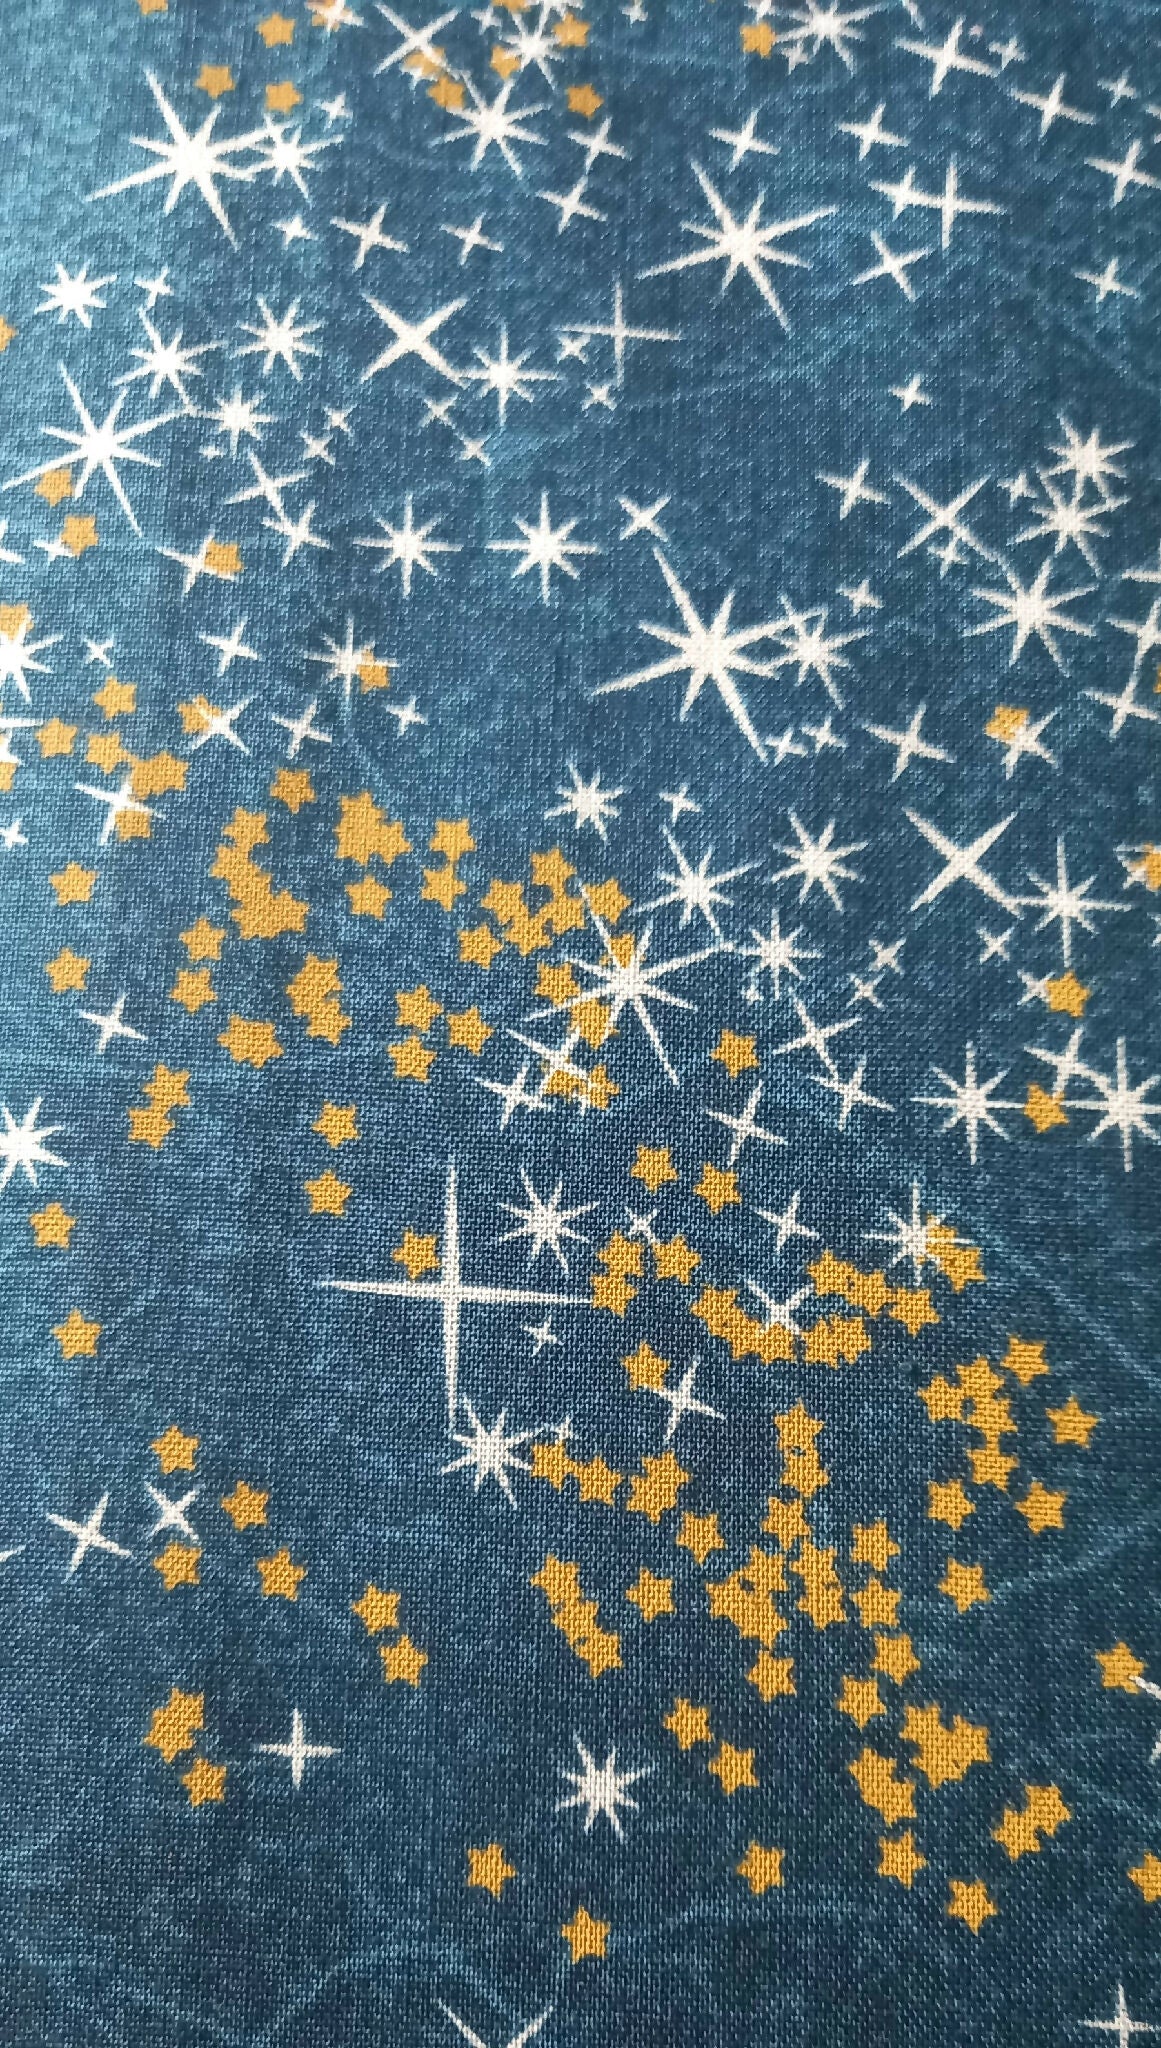 Infinity Scarf in Navy with Stars and Flowers